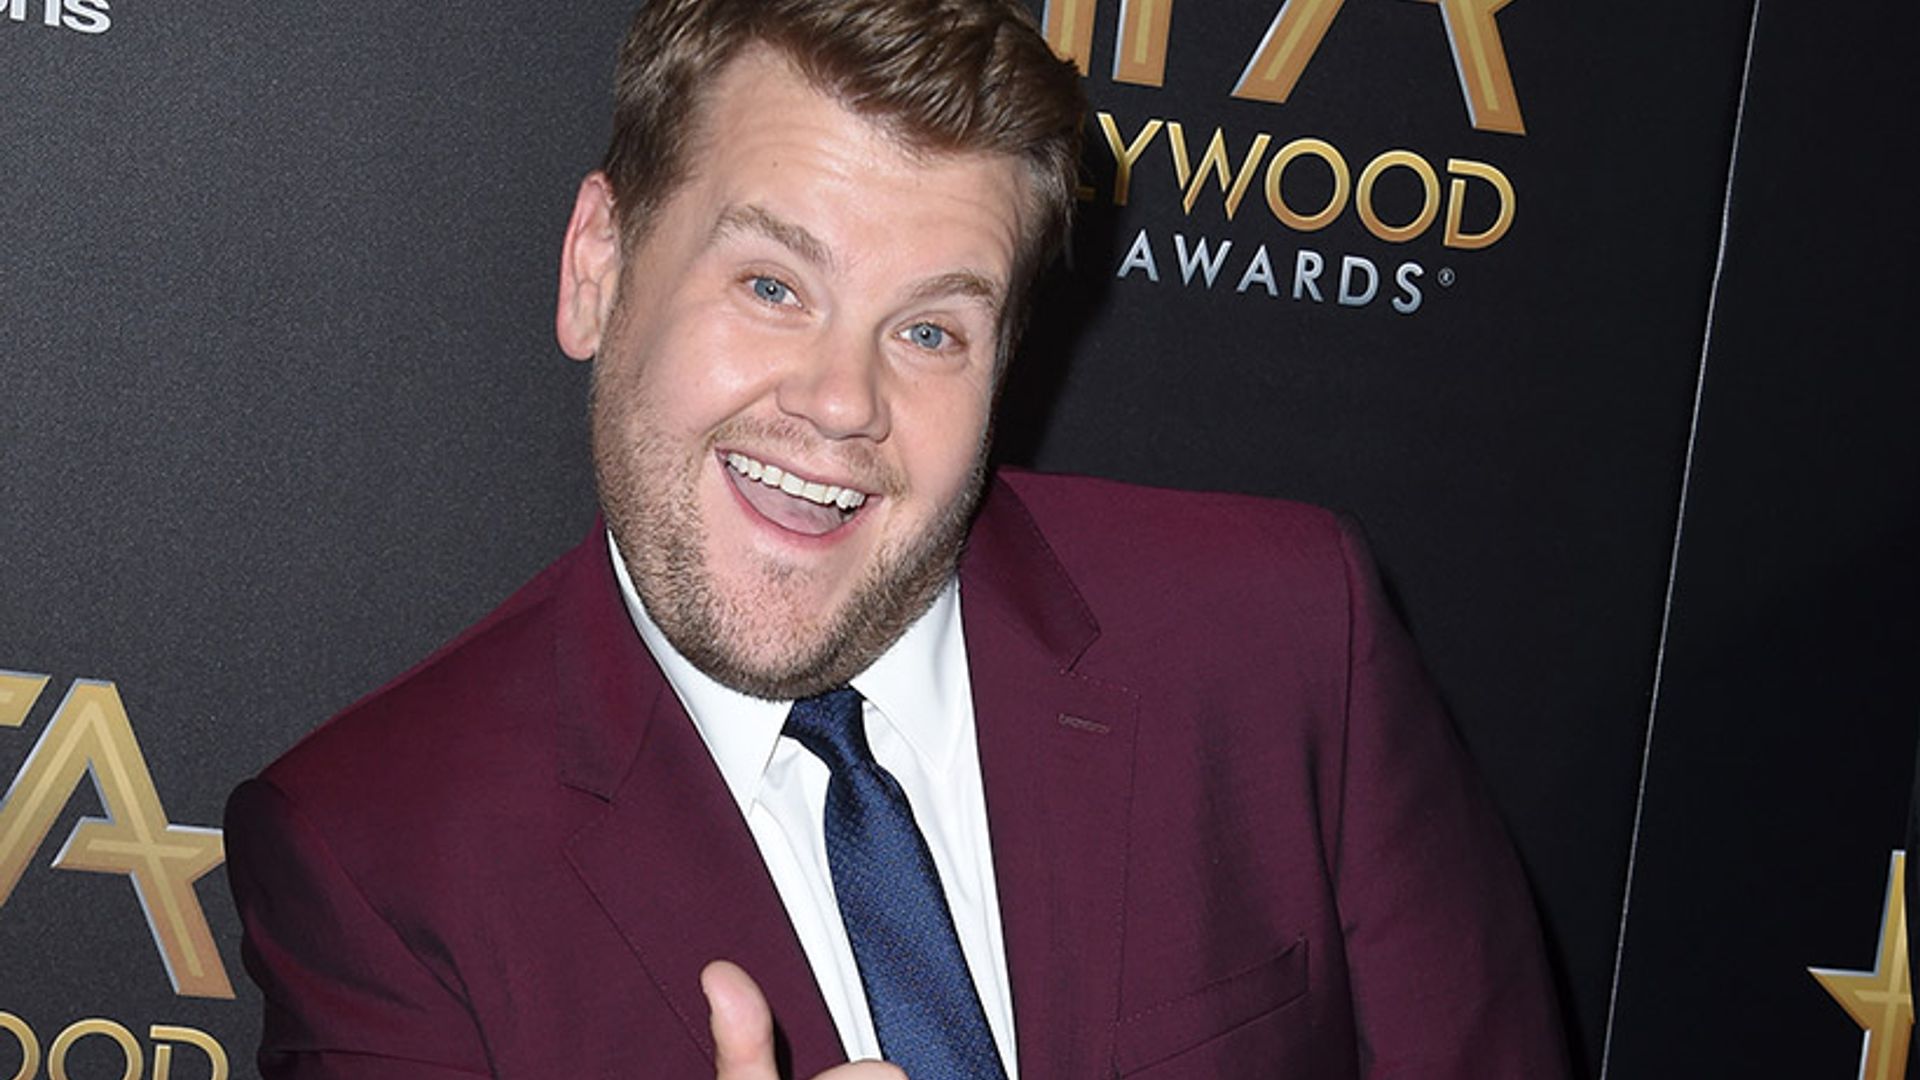 This pop princess is joining James Corden for Carpool Karaoke and we couldn’t be more excited!